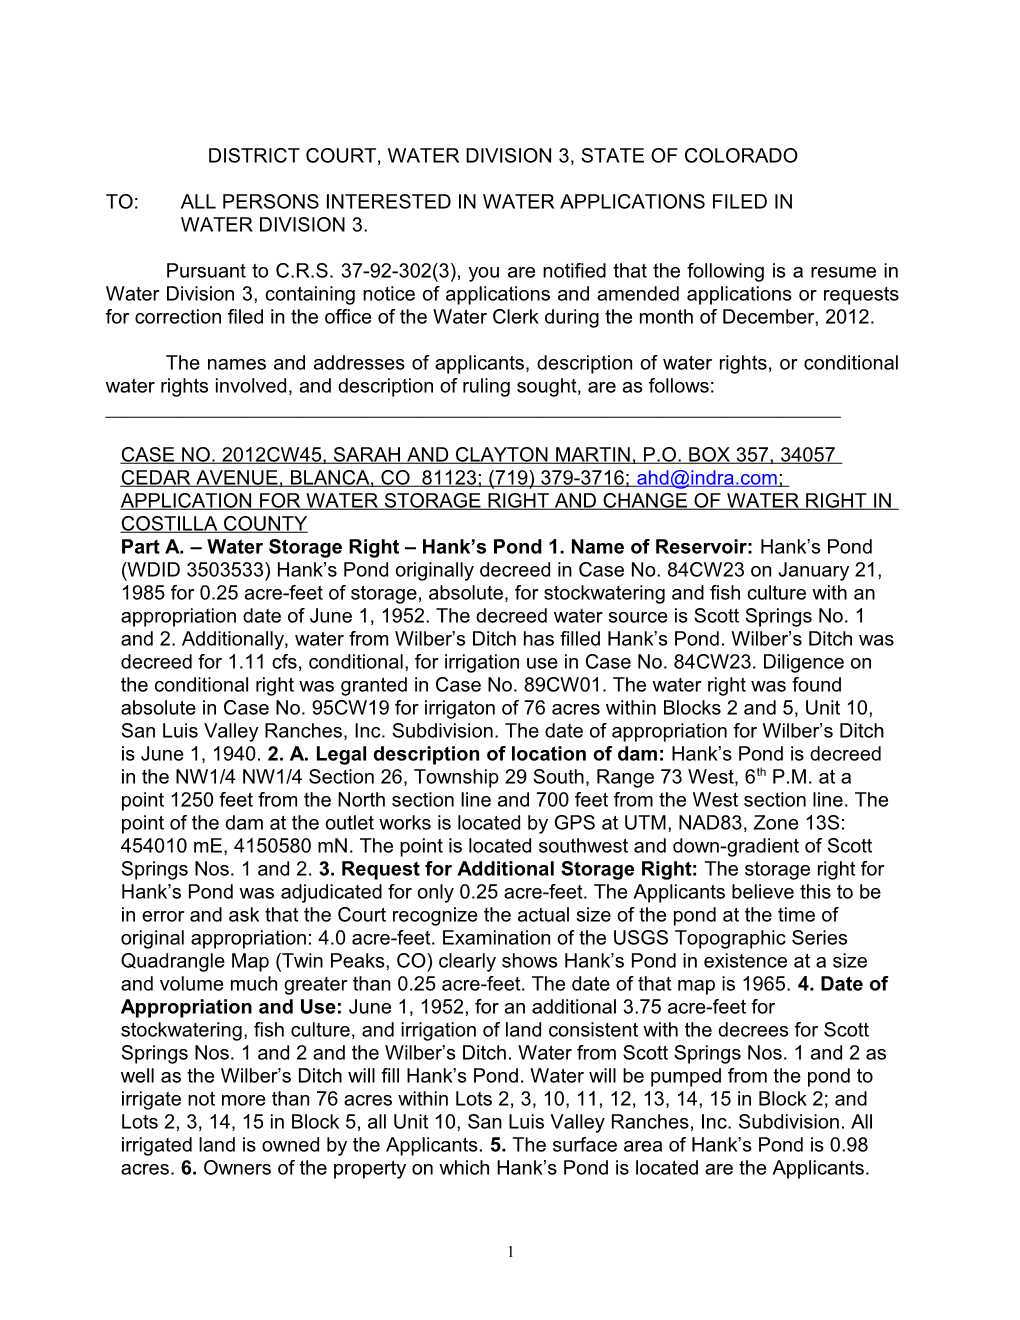 District Court, Water Division 3, State of Colorado s2